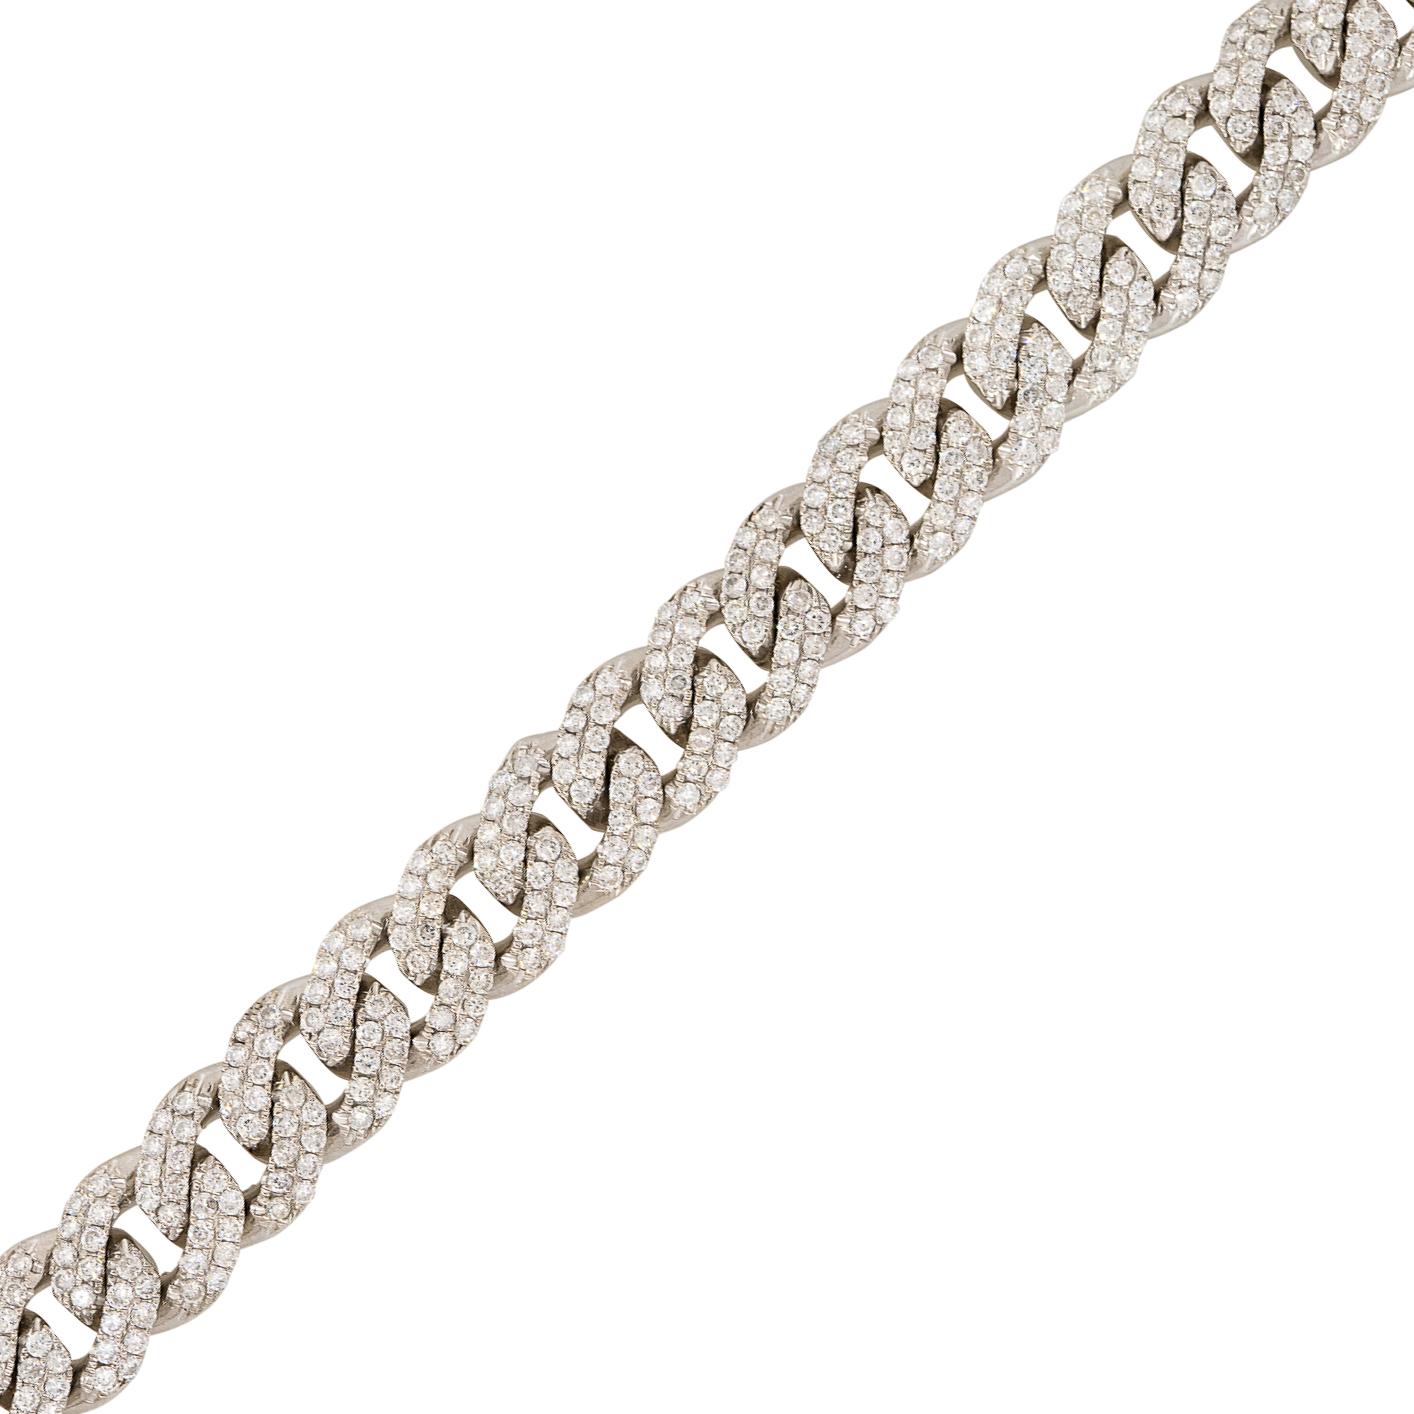 15.37 Carat Pave Diamond Cuban Link Chain Necklace 14 Karat In Stock In Excellent Condition For Sale In Boca Raton, FL